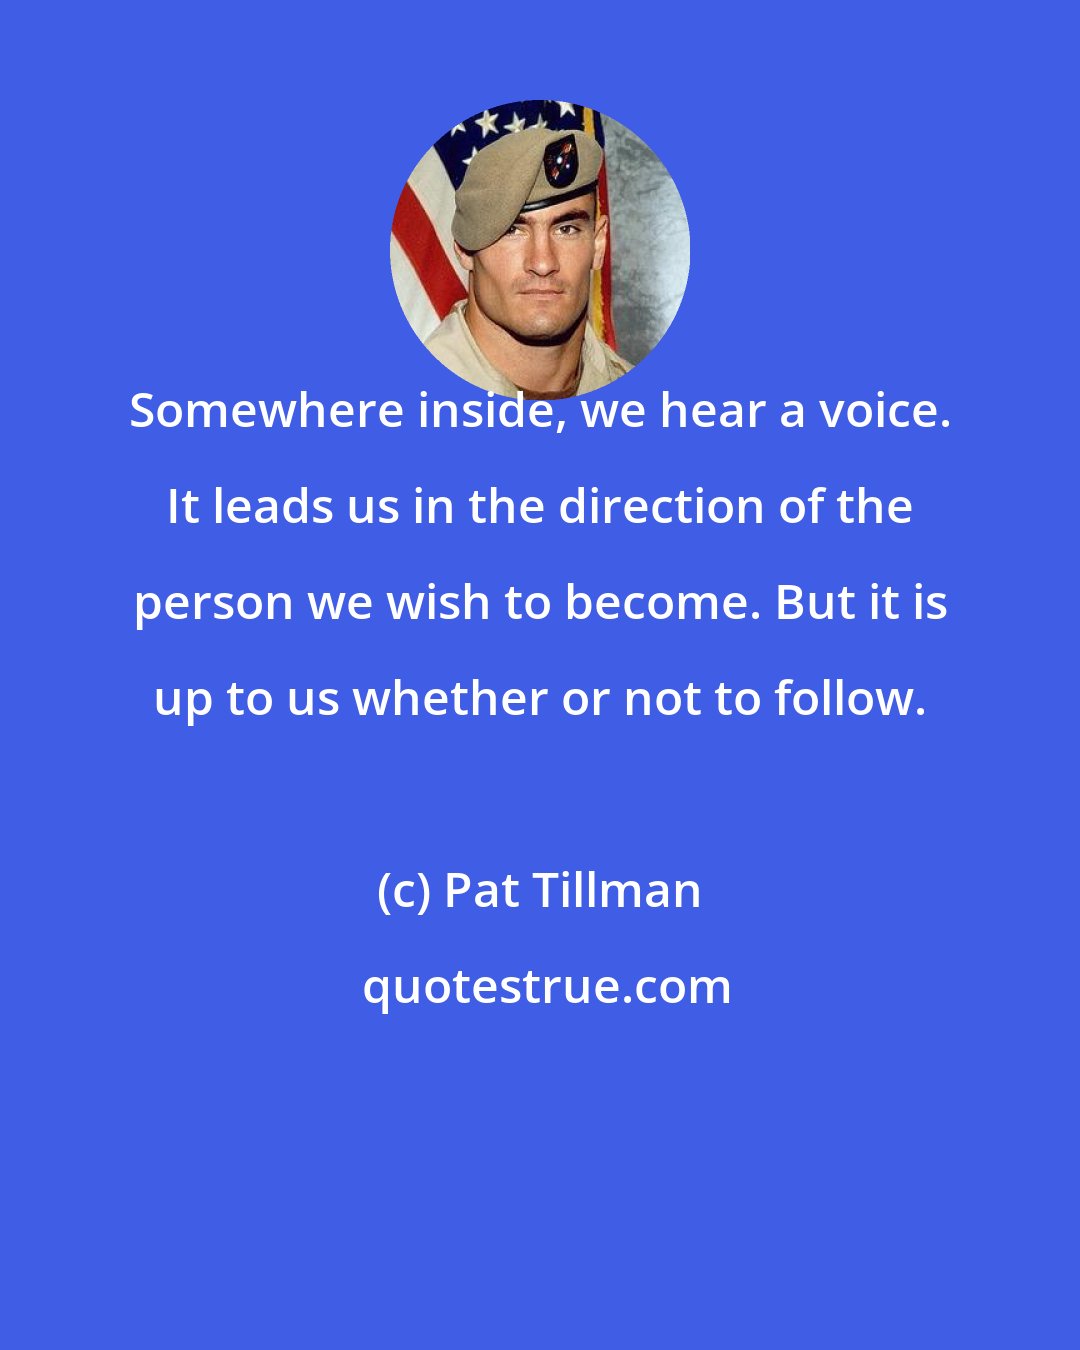 Pat Tillman: Somewhere inside, we hear a voice. It leads us in the direction of the person we wish to become. But it is up to us whether or not to follow.